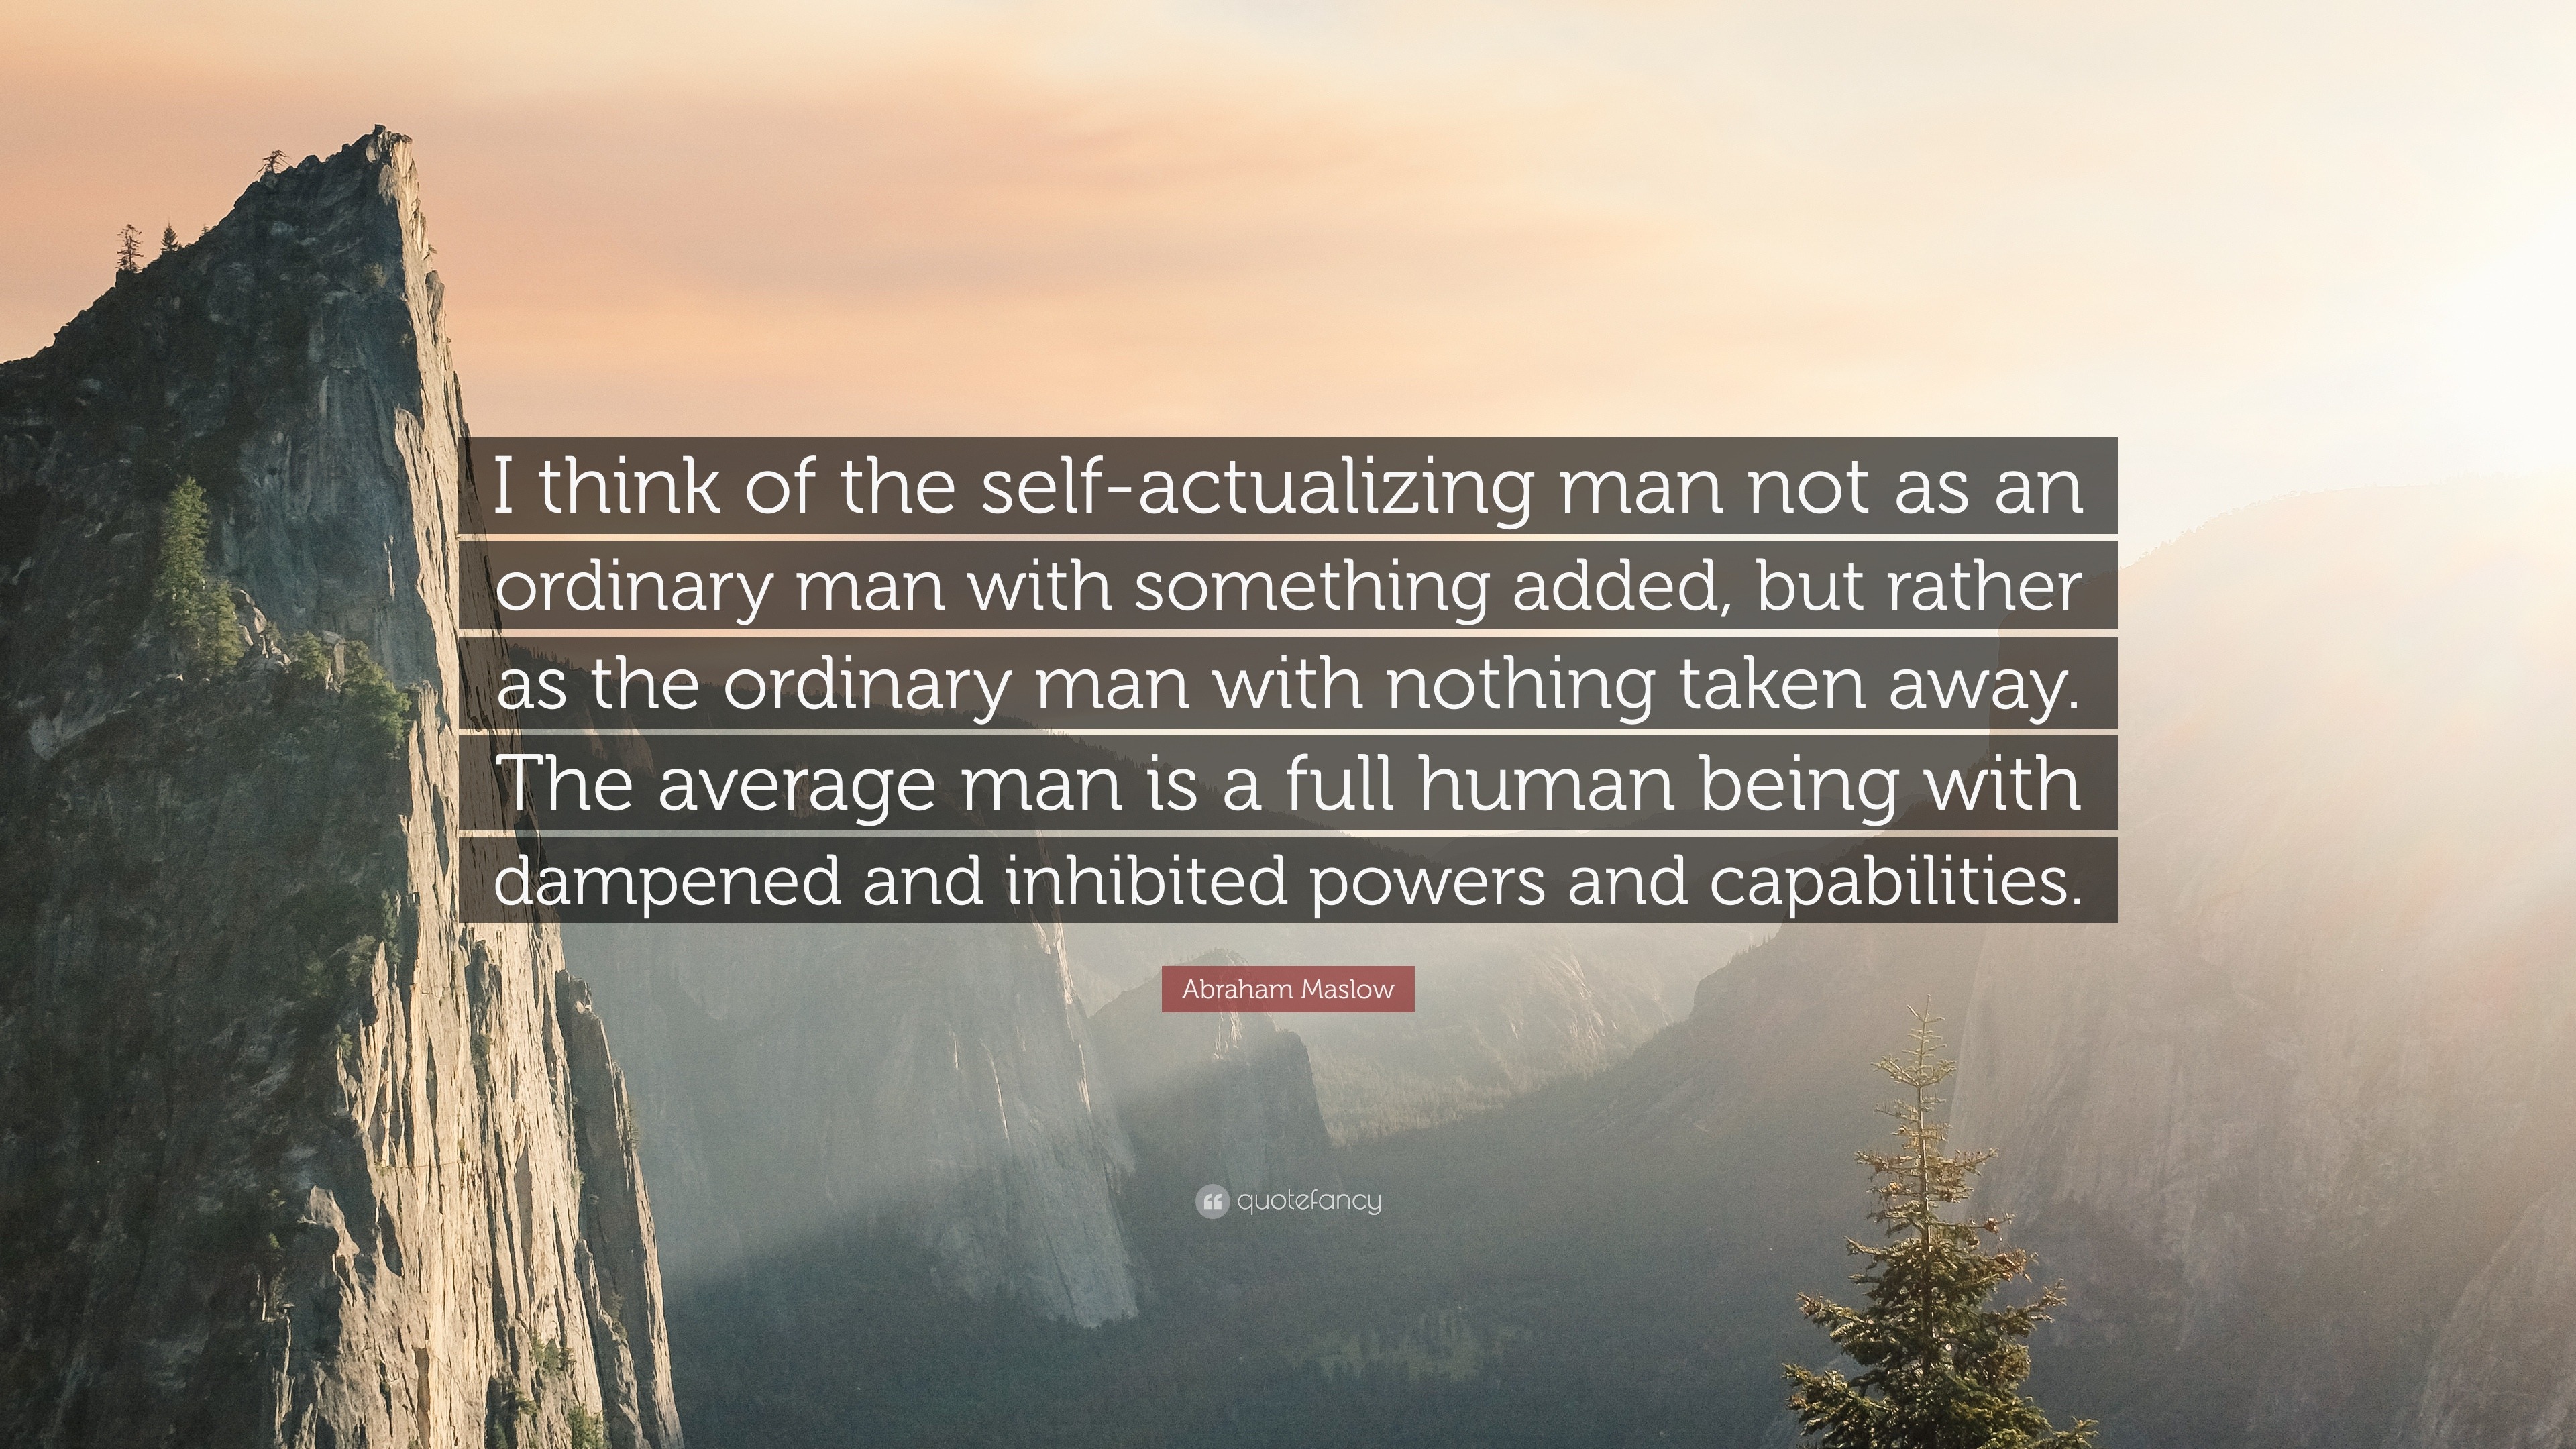 Abraham Maslow Quote I Think Of The Self Actualizing Man Not As An Ordinary Man With Something Added But Rather As The Ordinary Man With Not